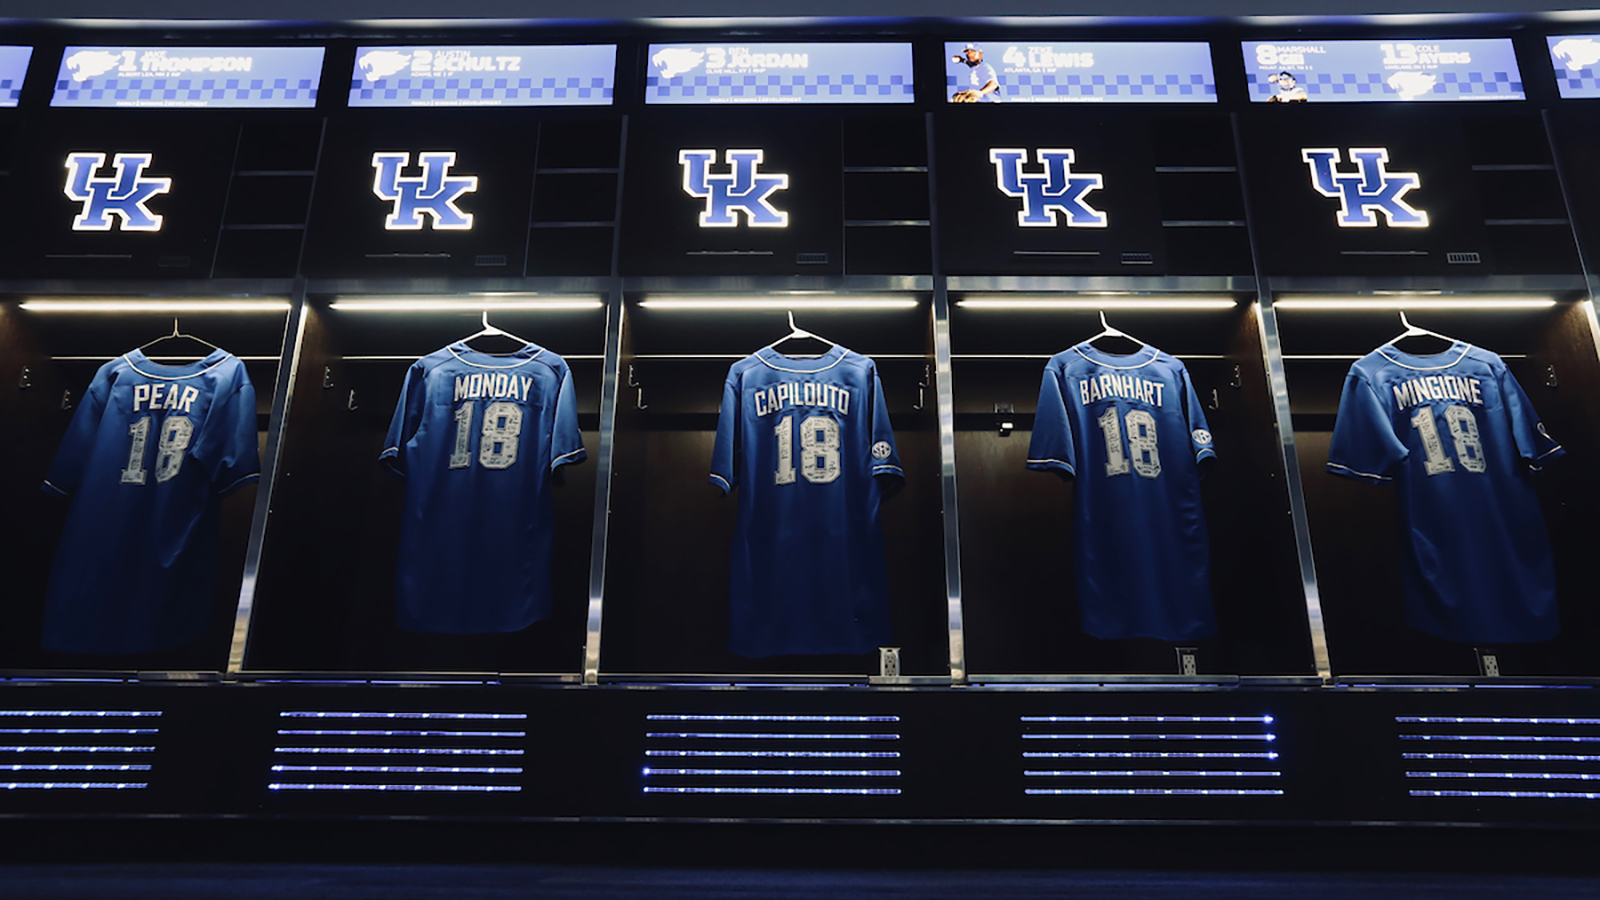 UK Baseball Team Gets First Look at "Incredible, Unbelievable" Stadium